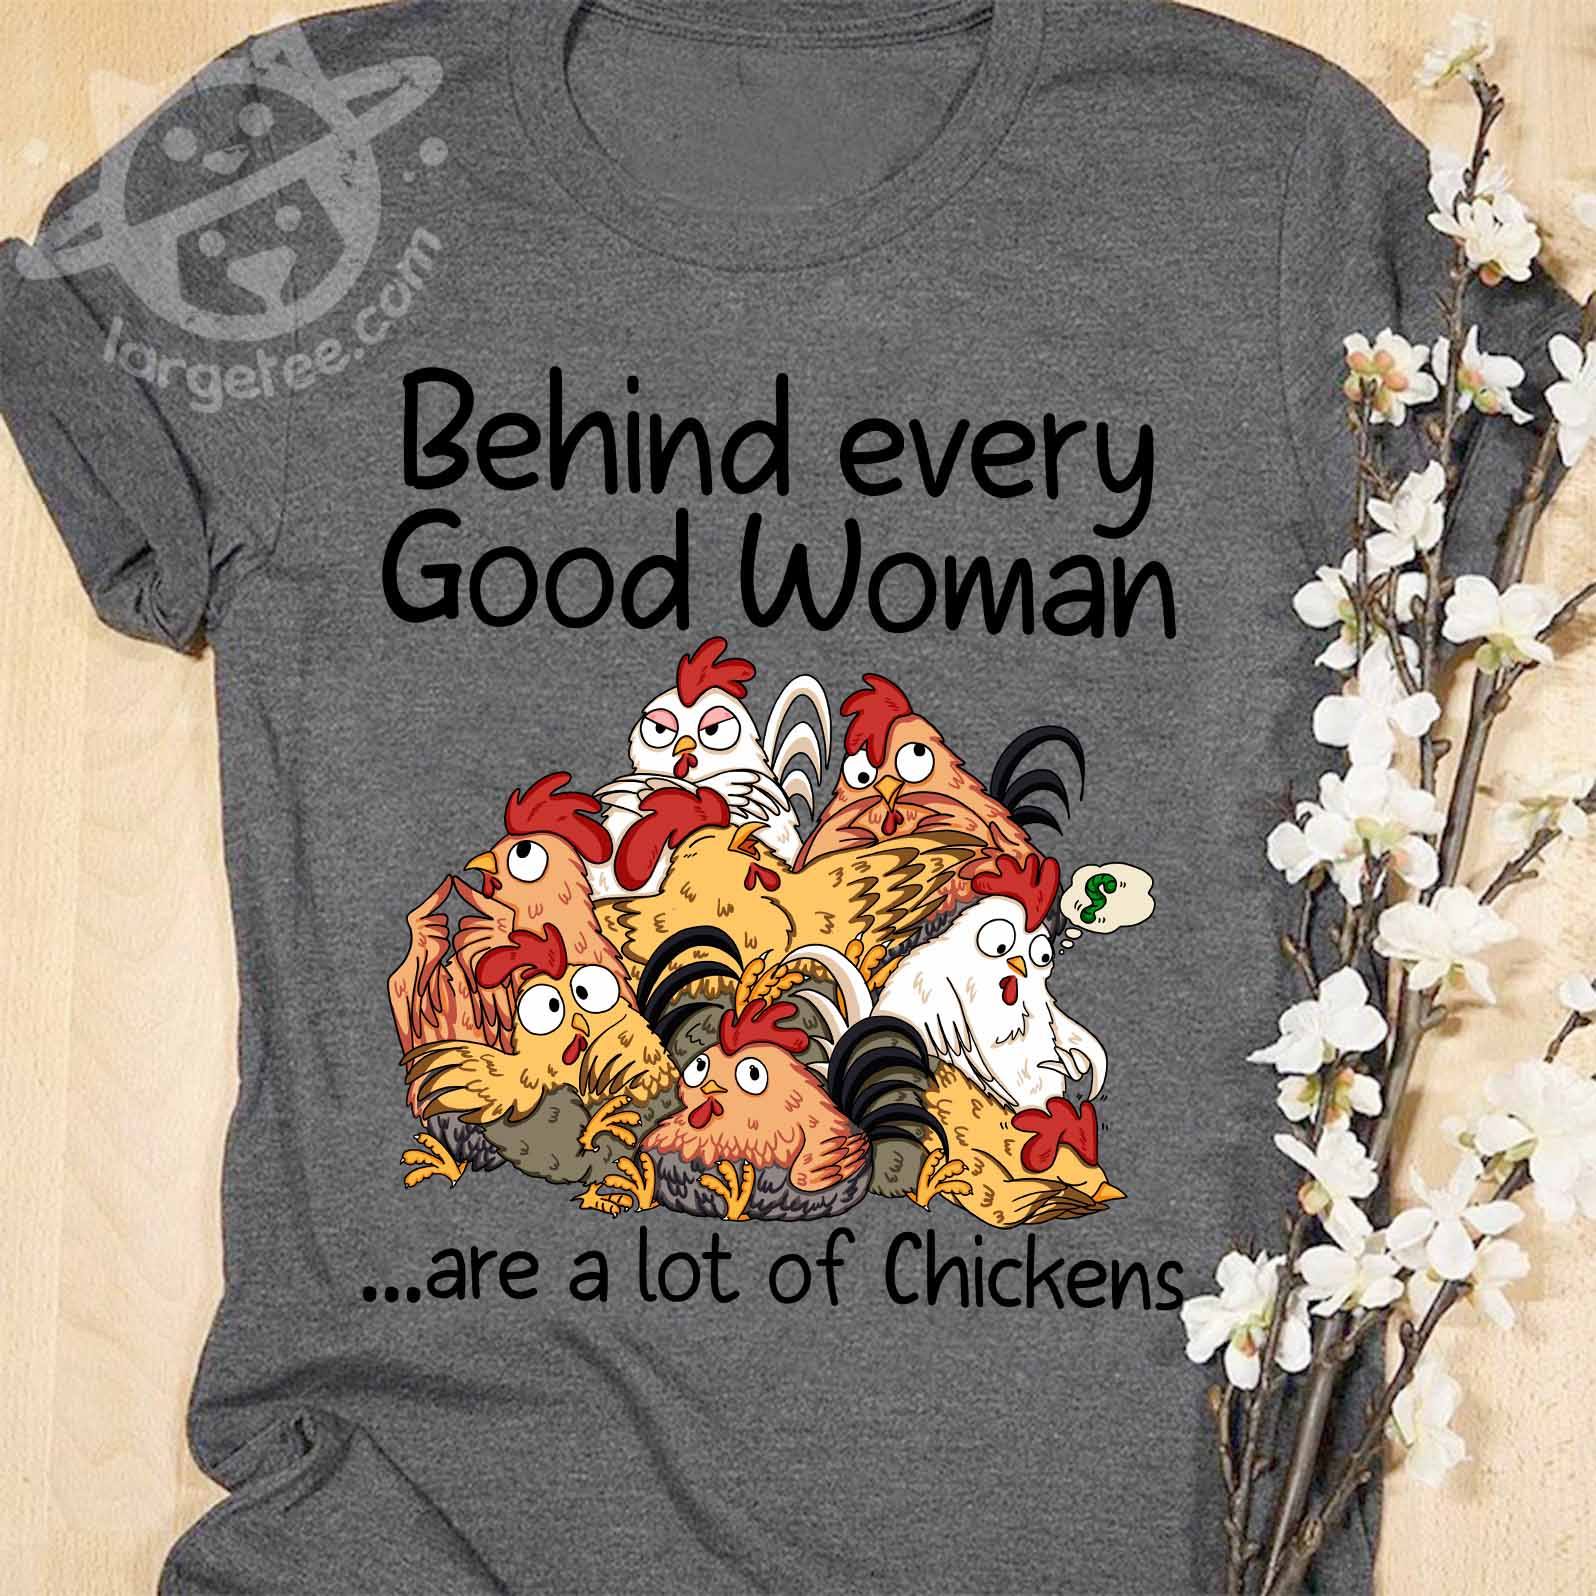 Behind every good woman are a lot of chickens - Chicken lover